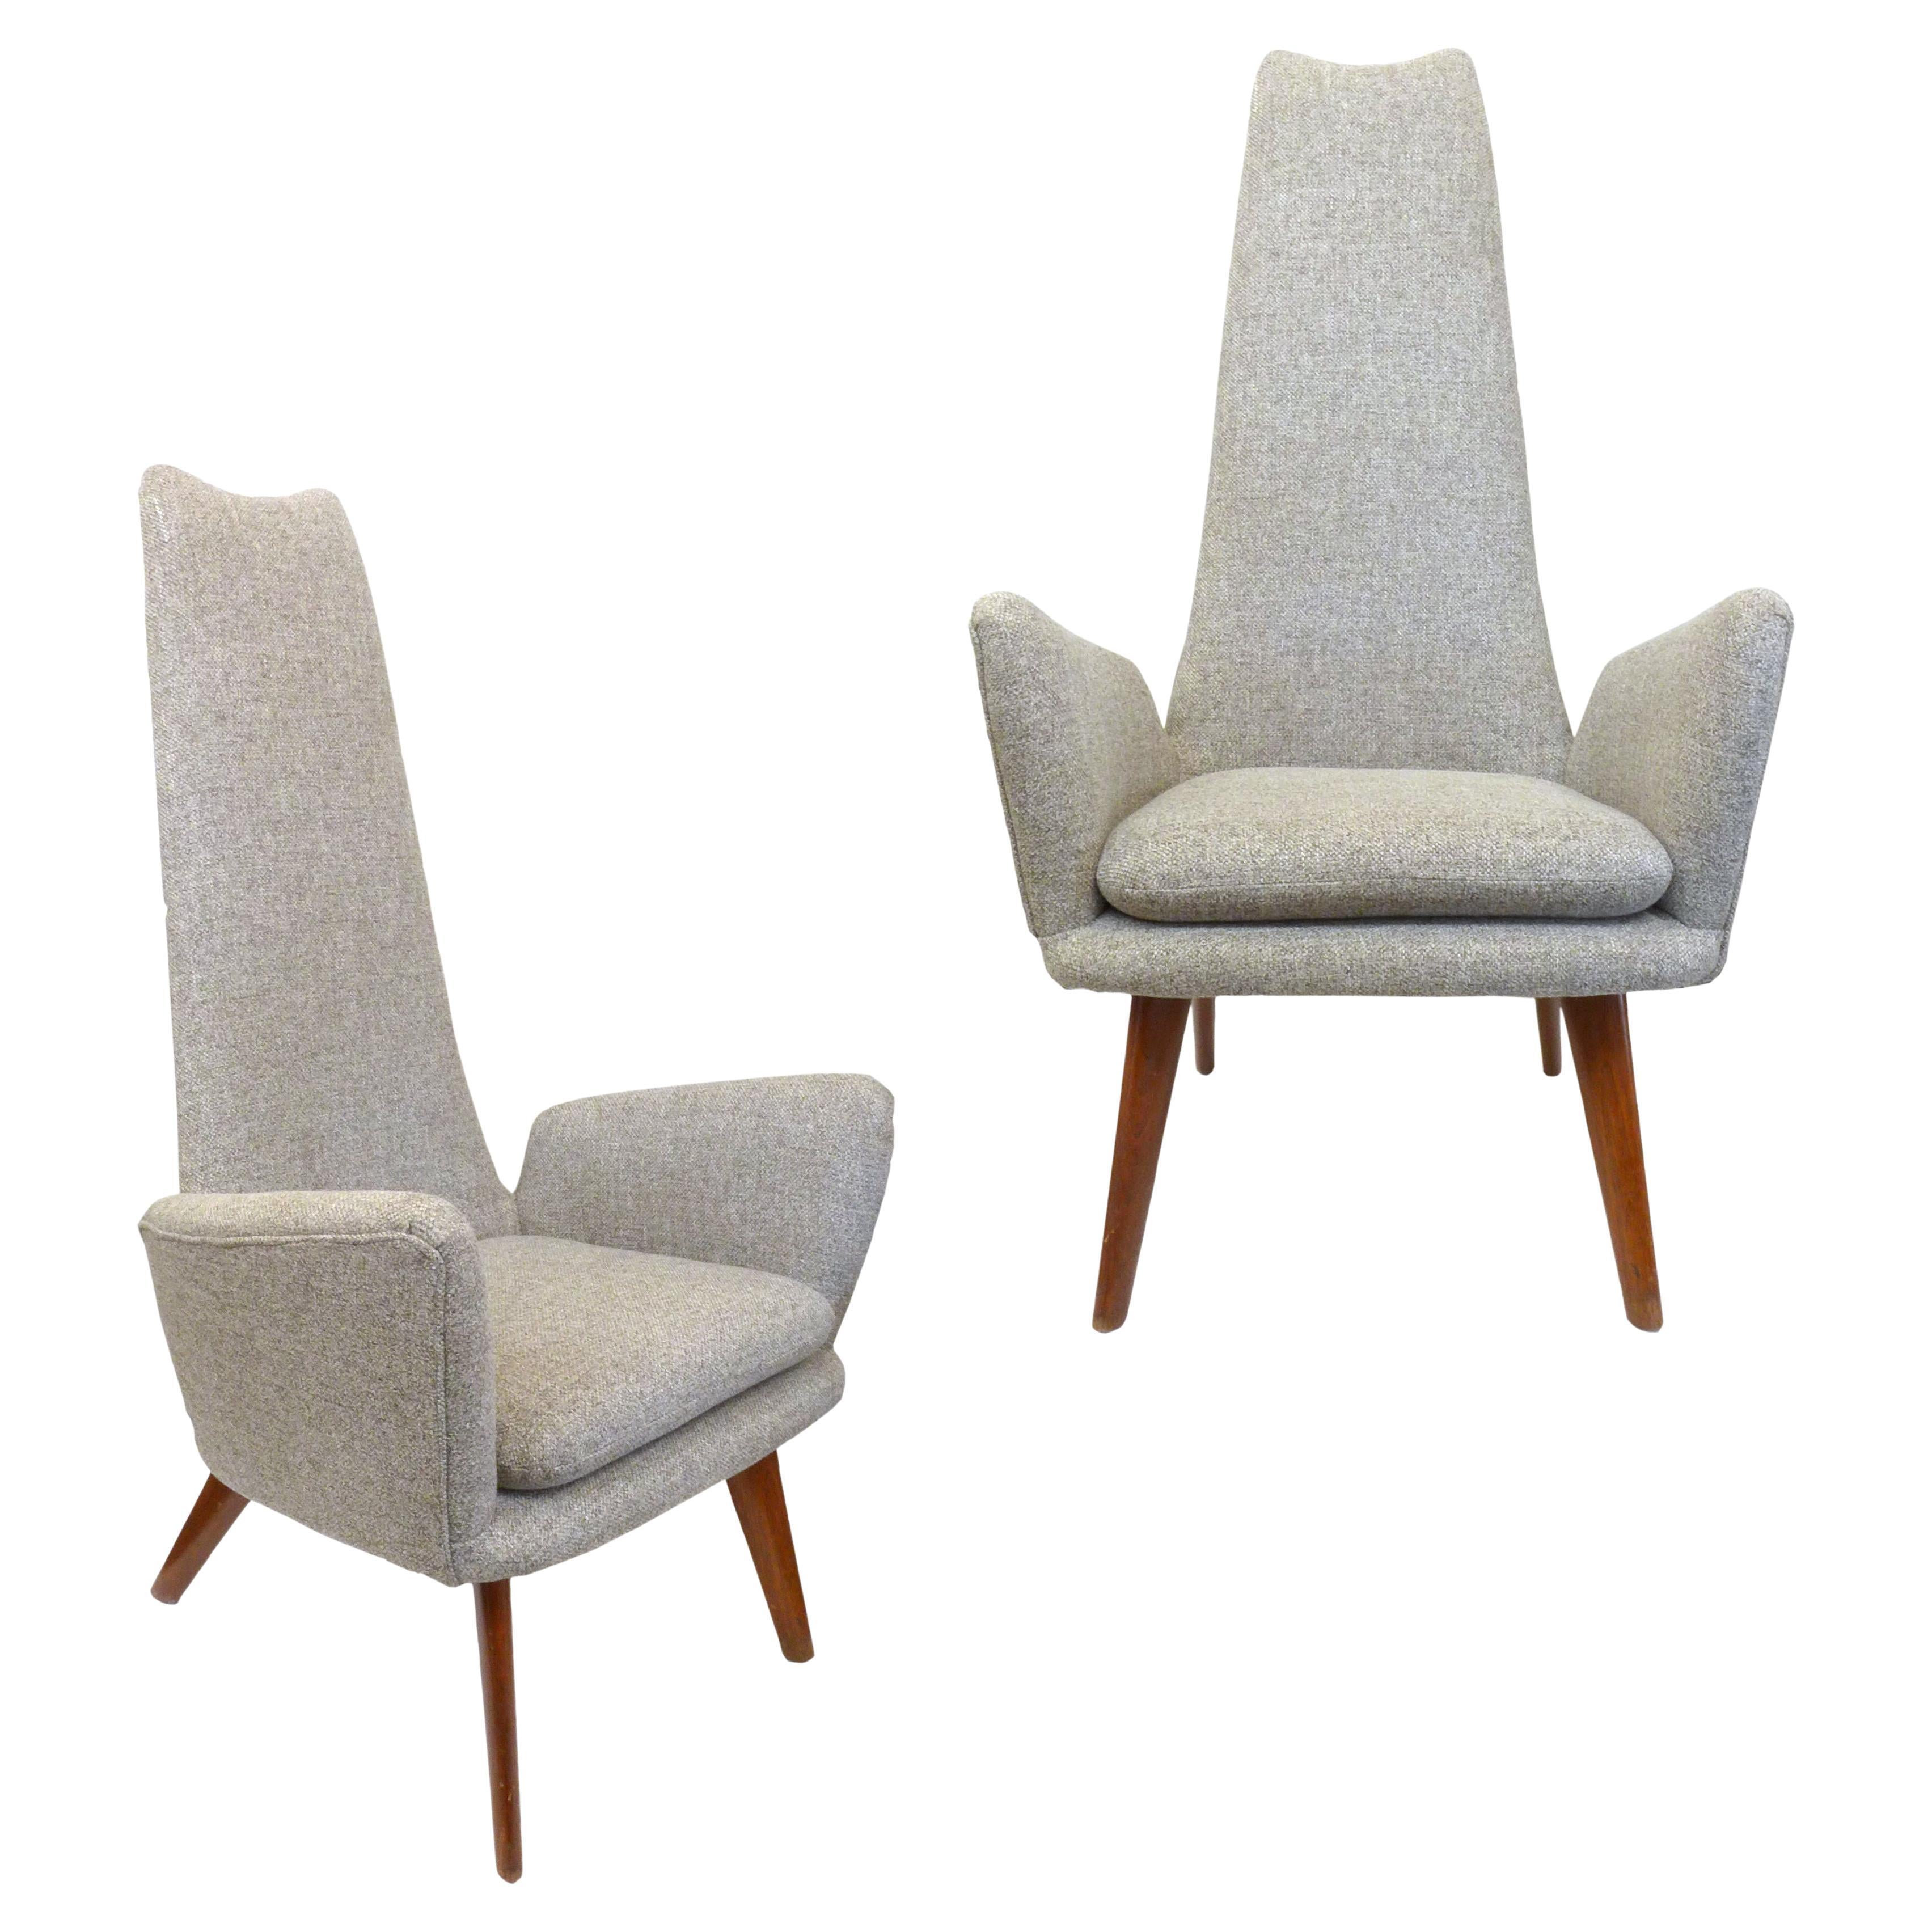 Pair of Mid-Century Modern Scandinavian Lounge Chairs For Sale